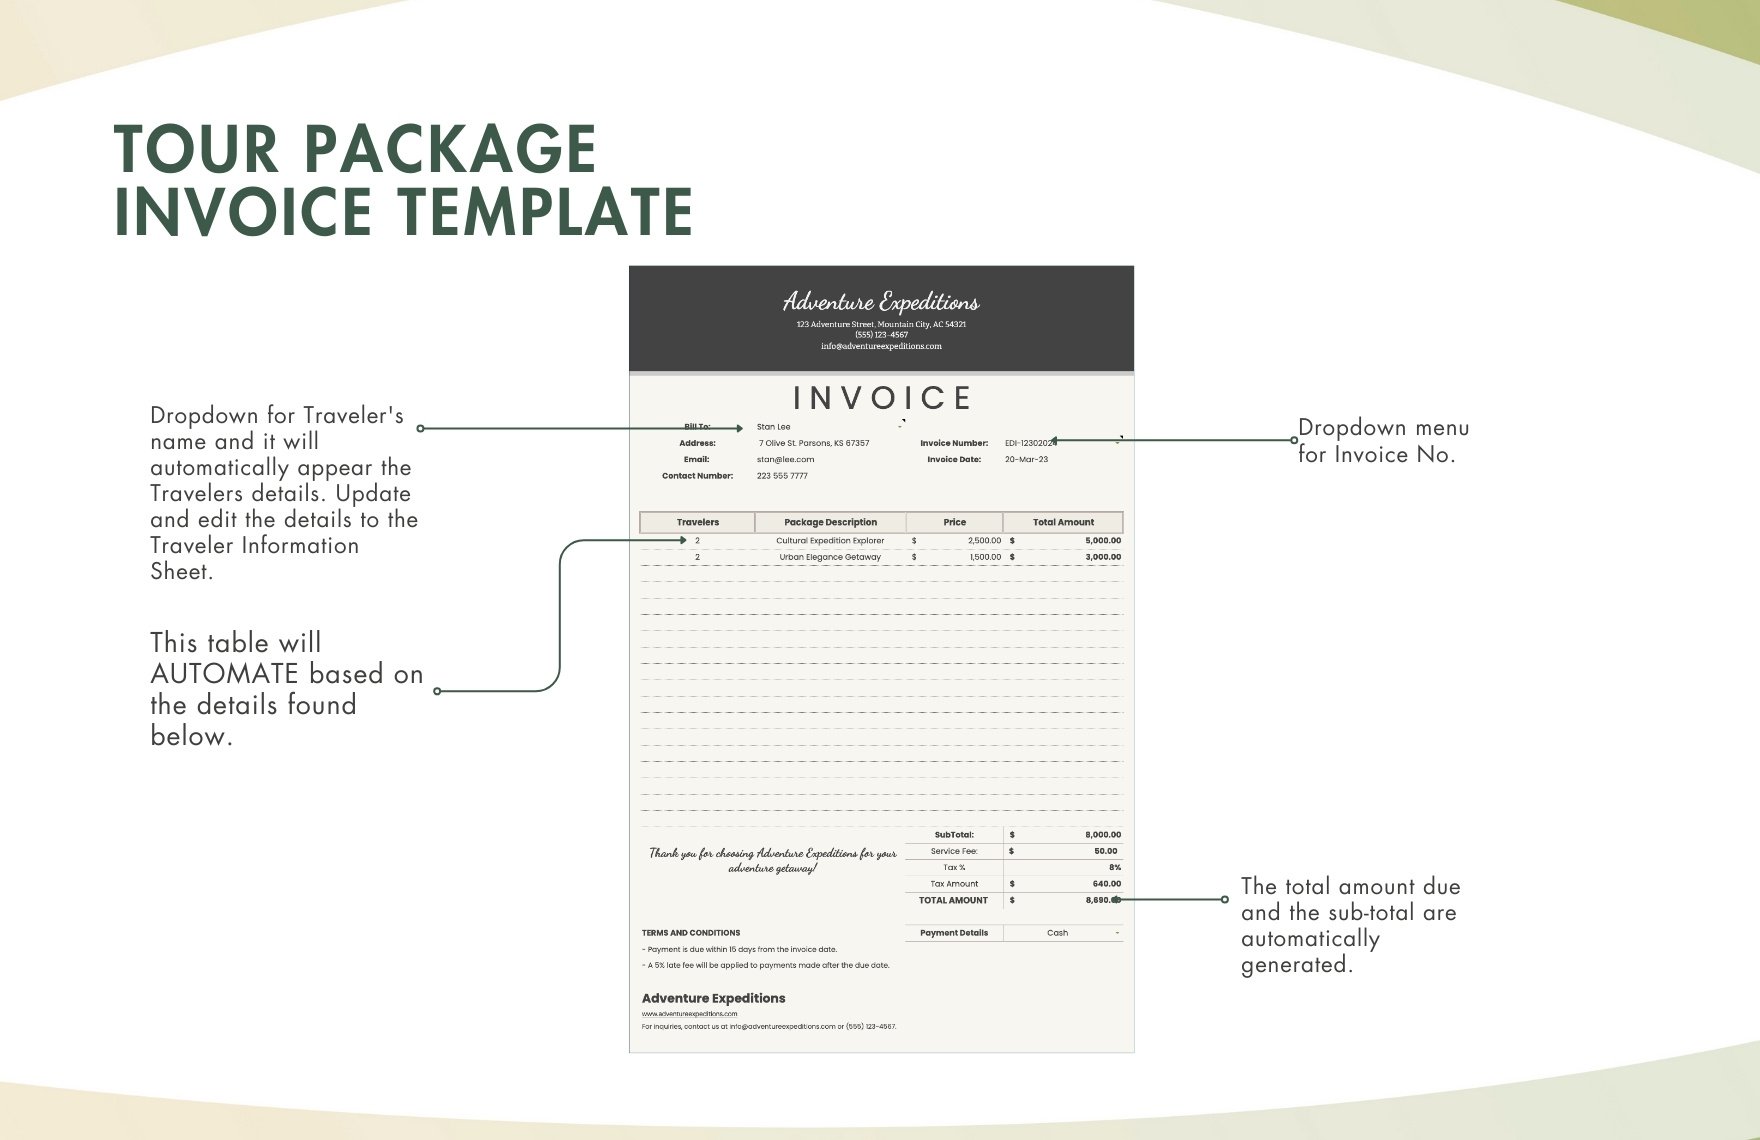 Tour Package Invoice Template